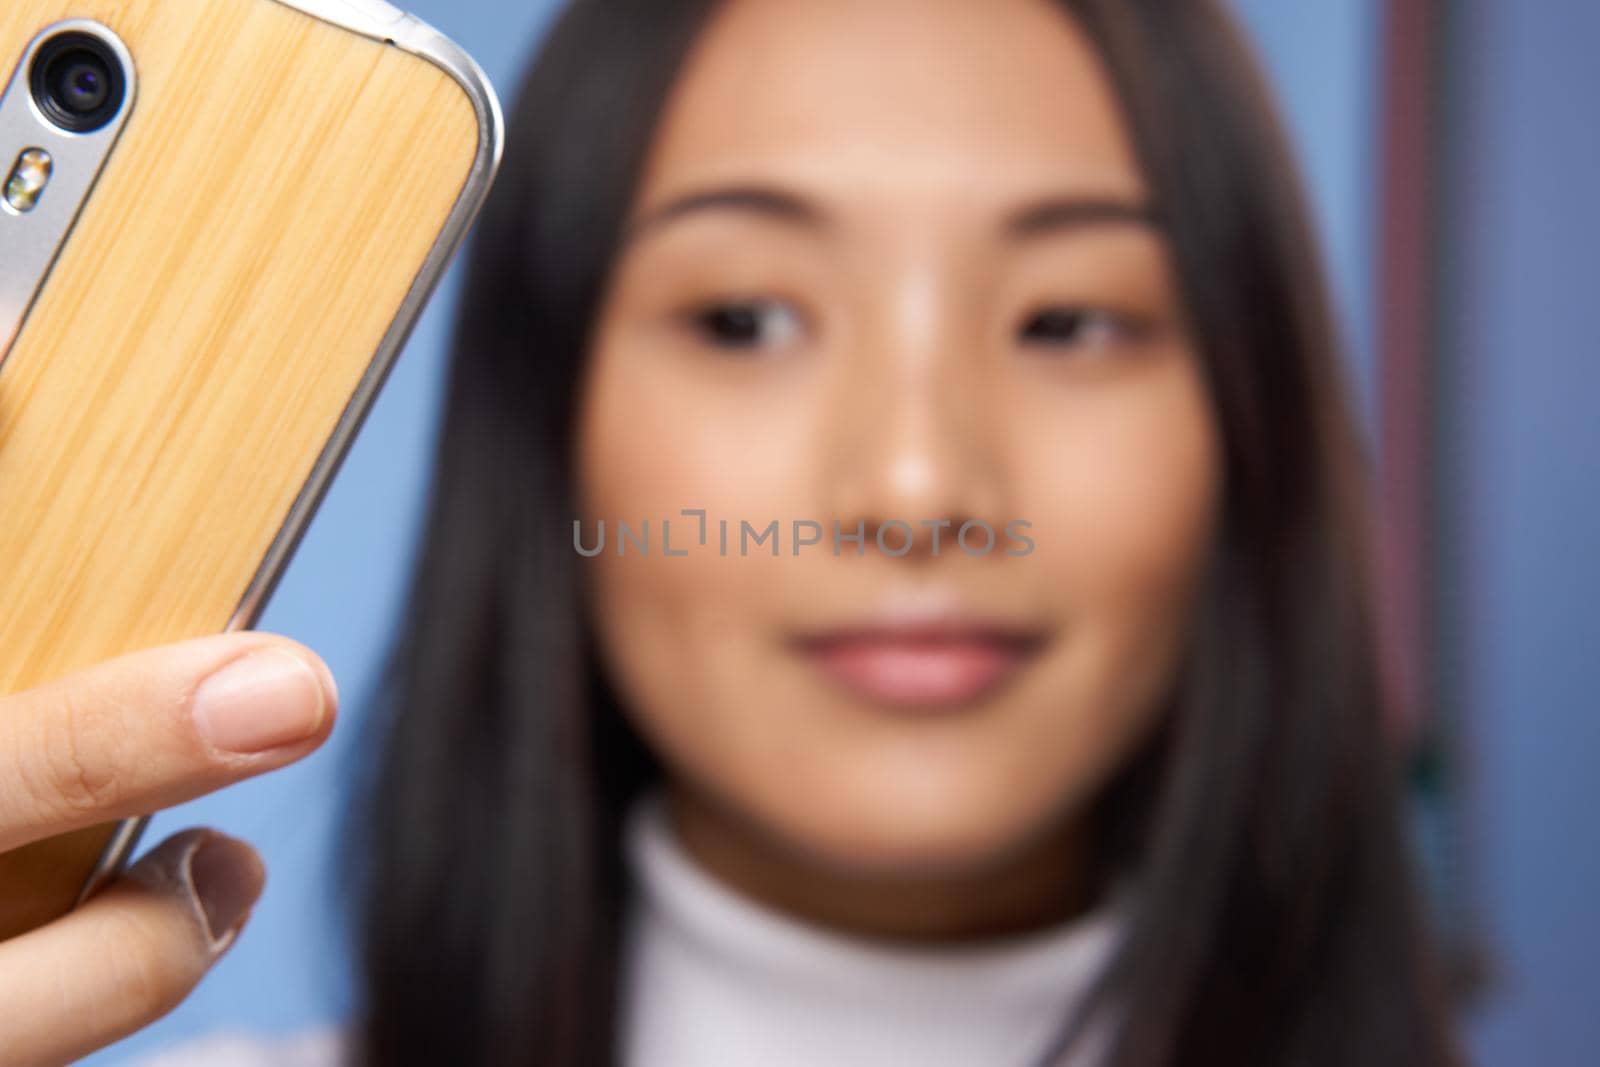 woman asian appearance attractive look phone close up studio blue background. High quality photo